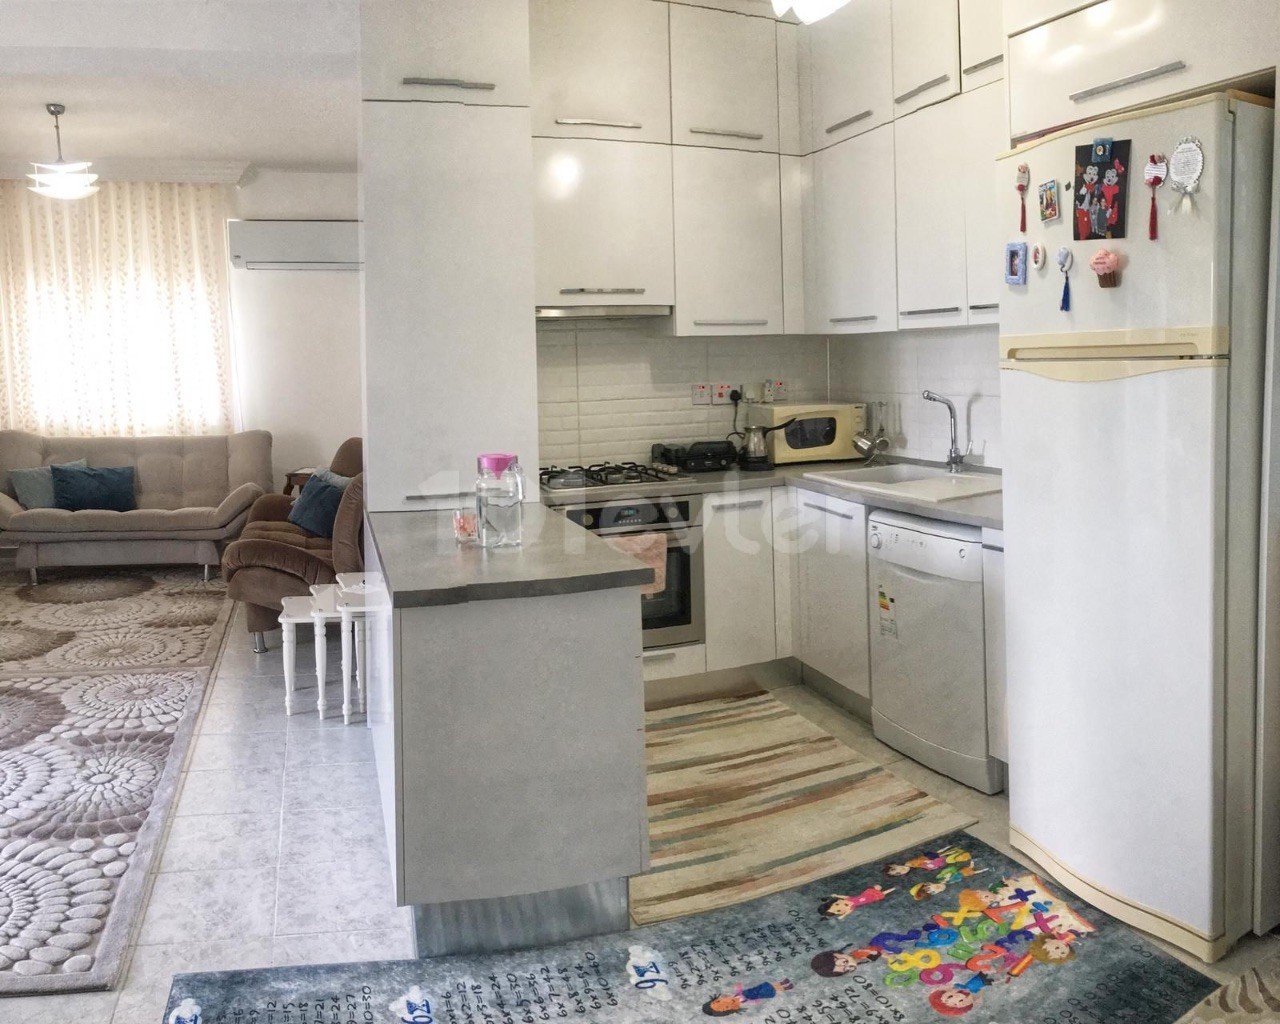 ✨✨ UNMISSABLE OPPORTUNITY IN THE CENTRAL LOCATION OF THE CITY!!! ✨✨✨✨✨✨✨ 2 + 1 APARTMENT FOR SALE IN A FULLY FURNISHED, FULLY FURNISHED, EQUIVALENT COBANED, INEXPENSIVE, WELL-MAINTAINED APARTMENT IN THE VICINITY OF THE TEACHERS' HOUSE✨✨✨✨✨